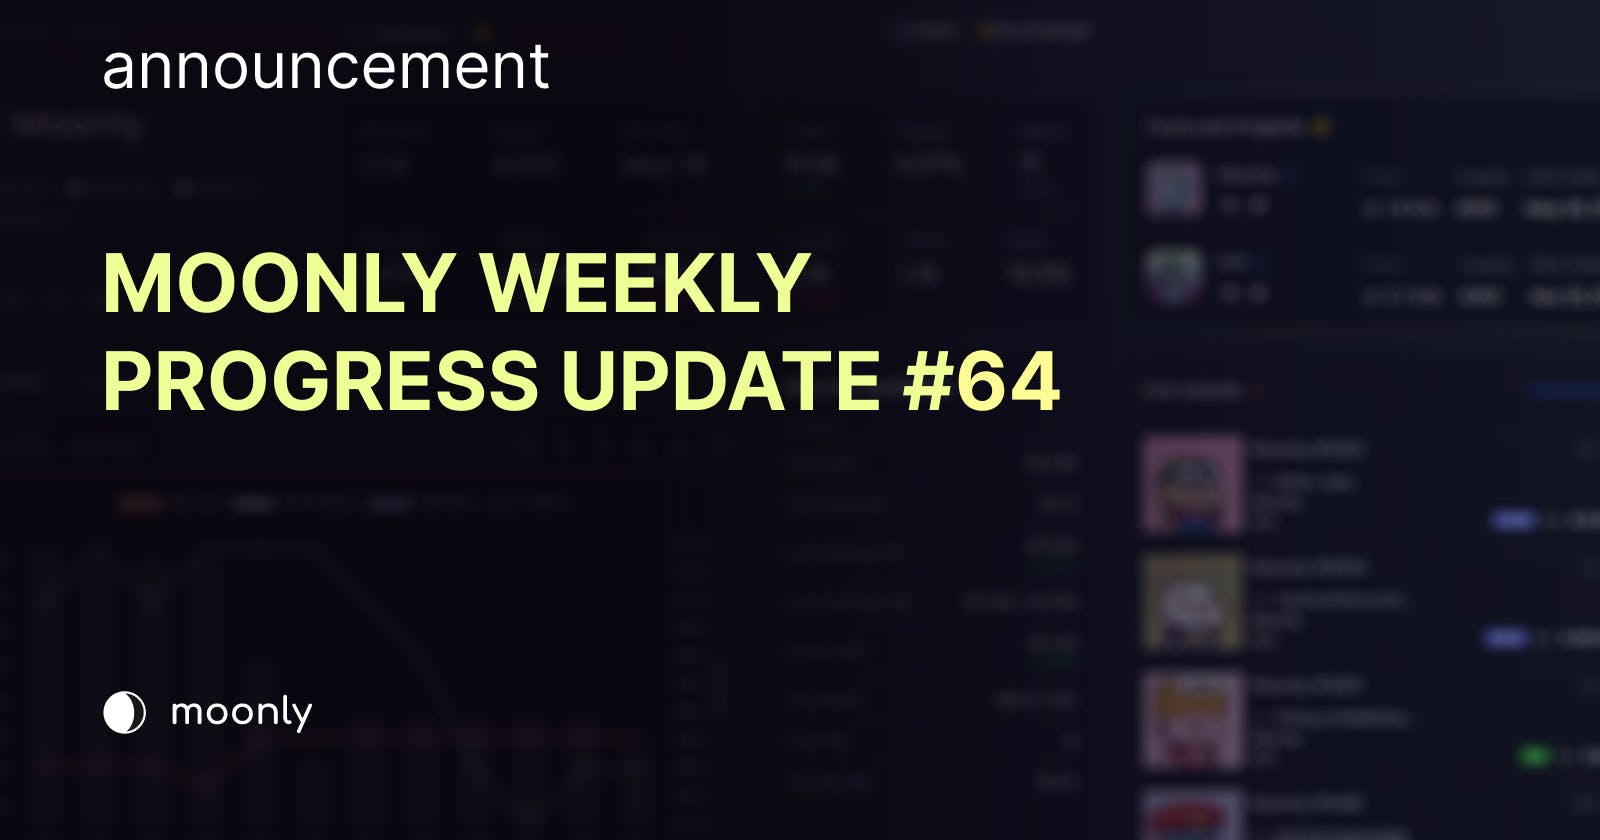 Moonly weekly progress update #64 - Announcement Catcher and Staking V2